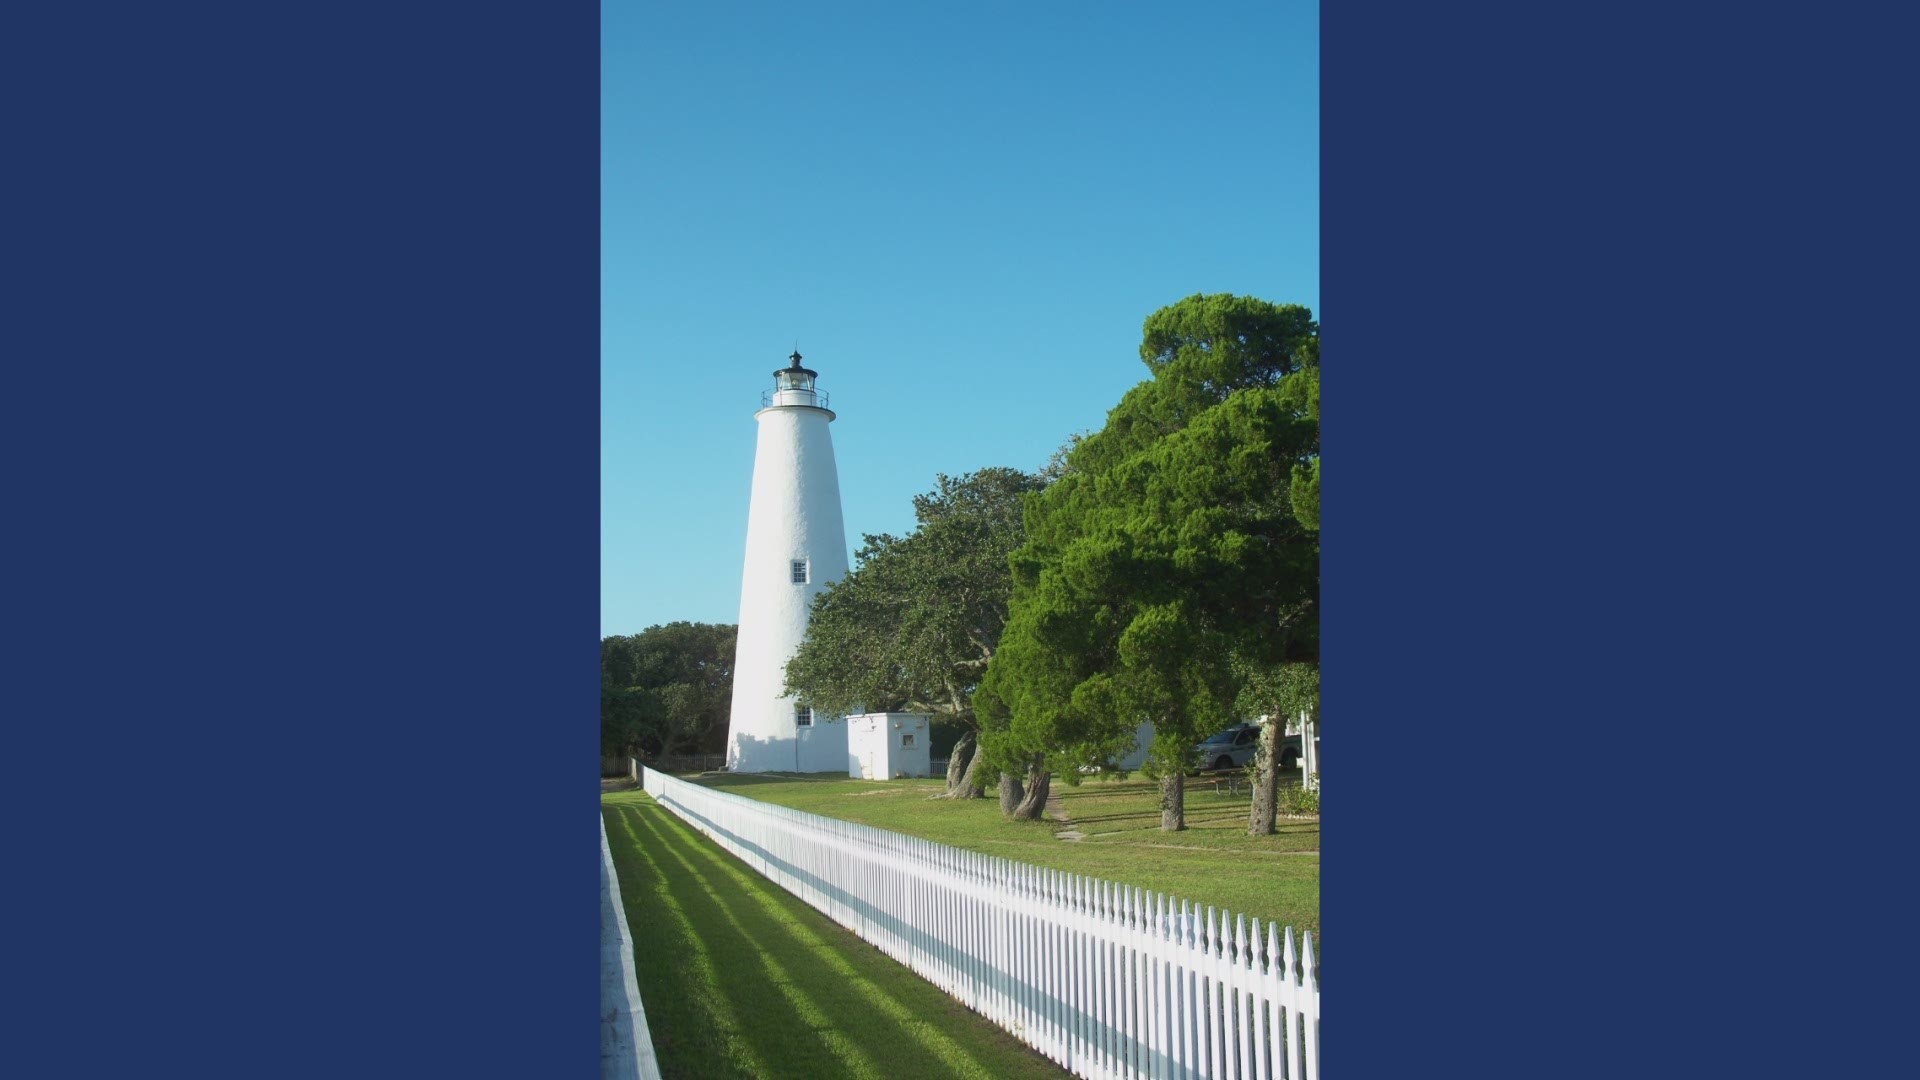 The Ocracoke Lighthouse is the second-oldest lighthouse in the nation still operating and has been damaged several times in recent years by hurricanes.